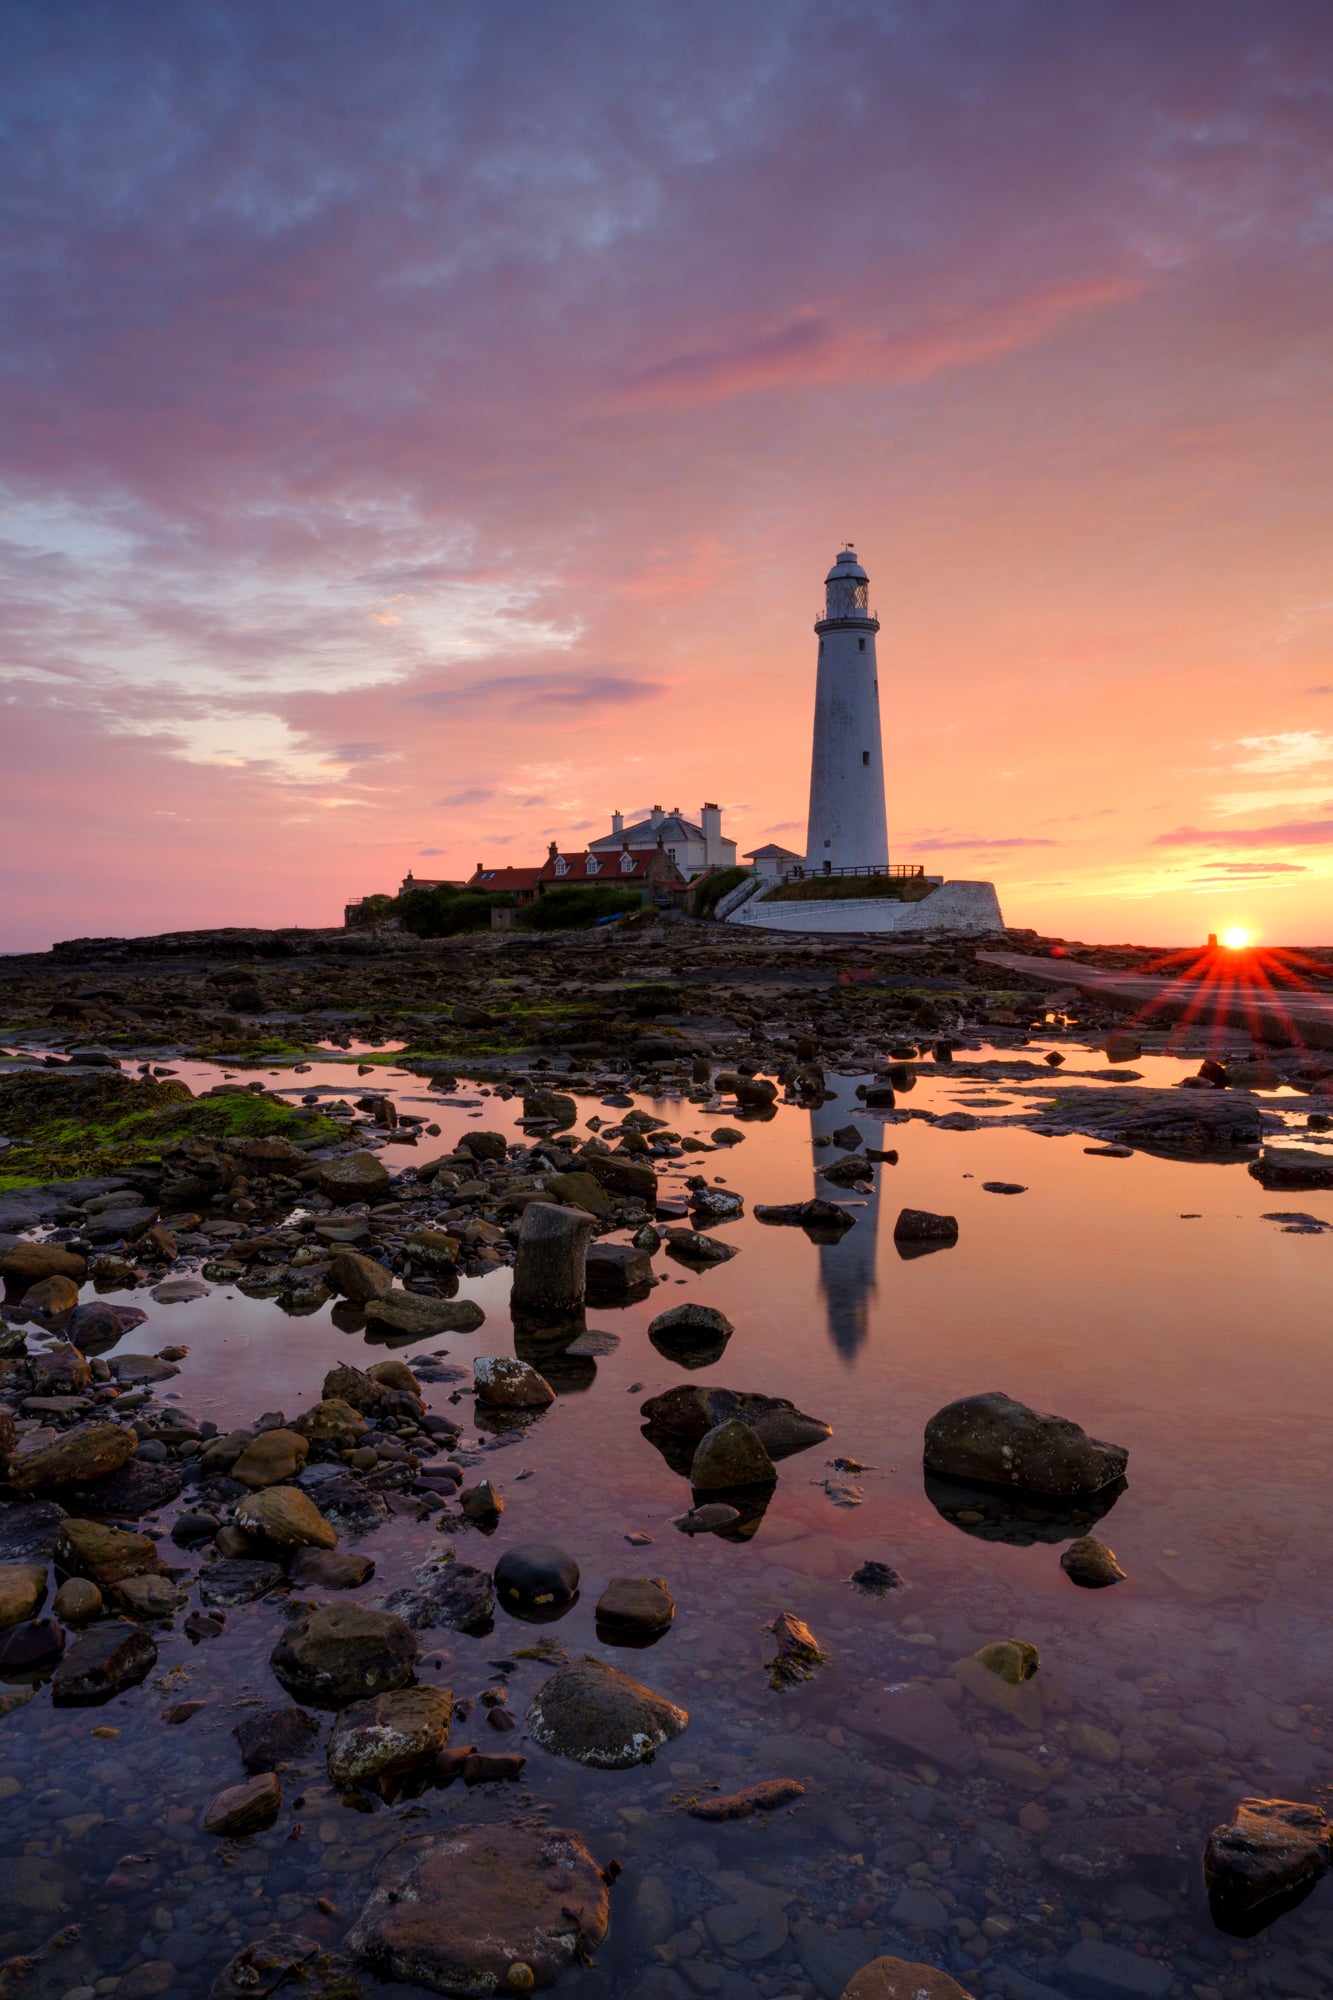 St Mary’s Lighthouse & Island Photography Workshop – 24th March 2023